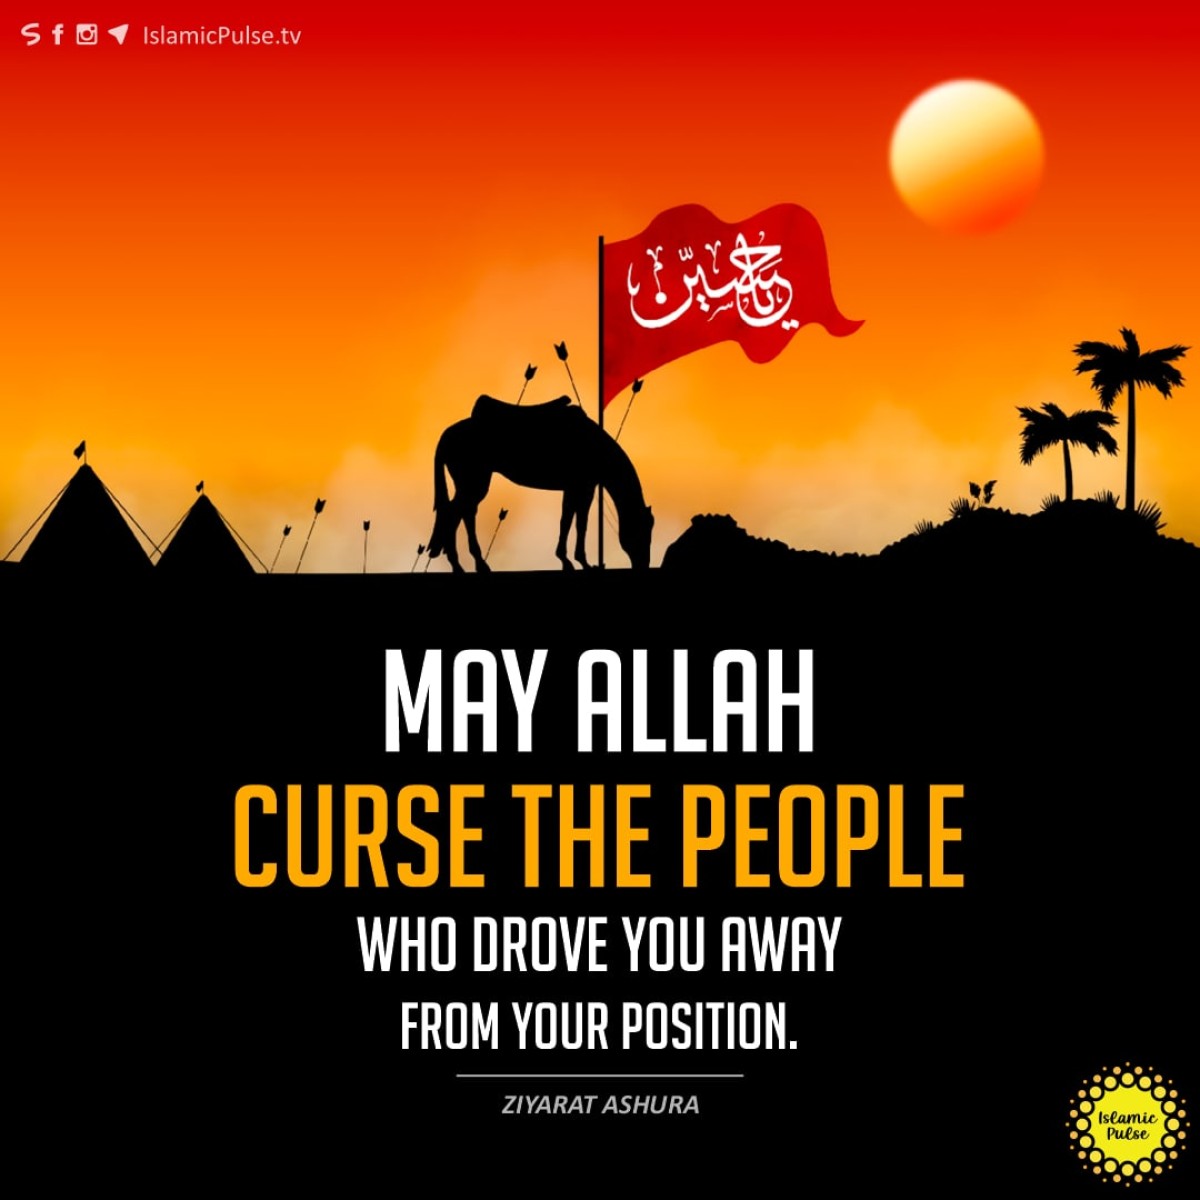 "May Allah curse the people who drove you away from your position."